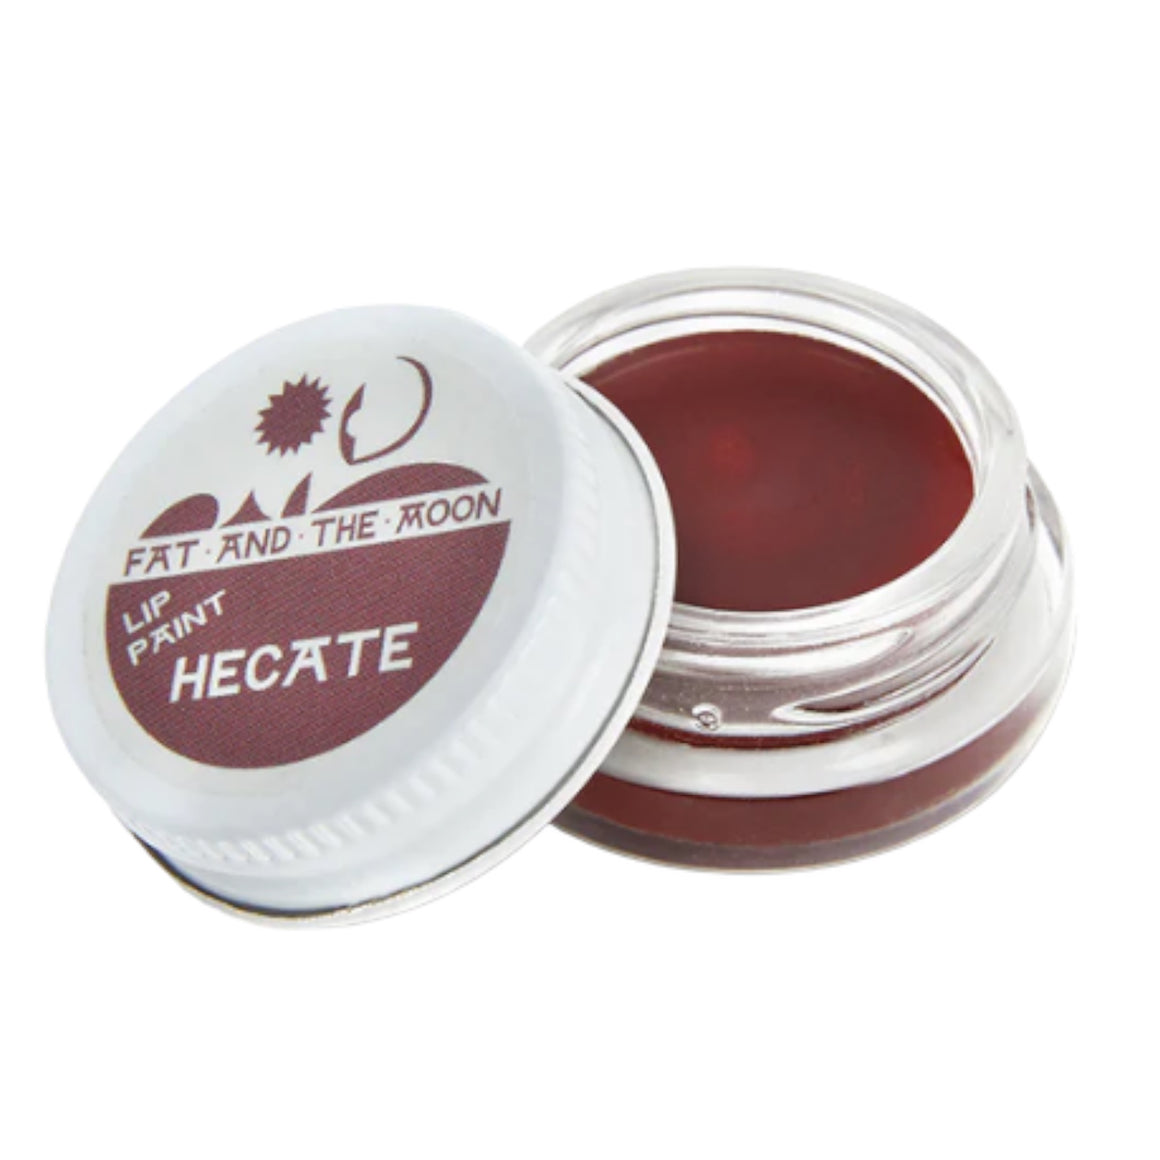 Hecate Lip Paint 0.15oz - Fat & The Moon